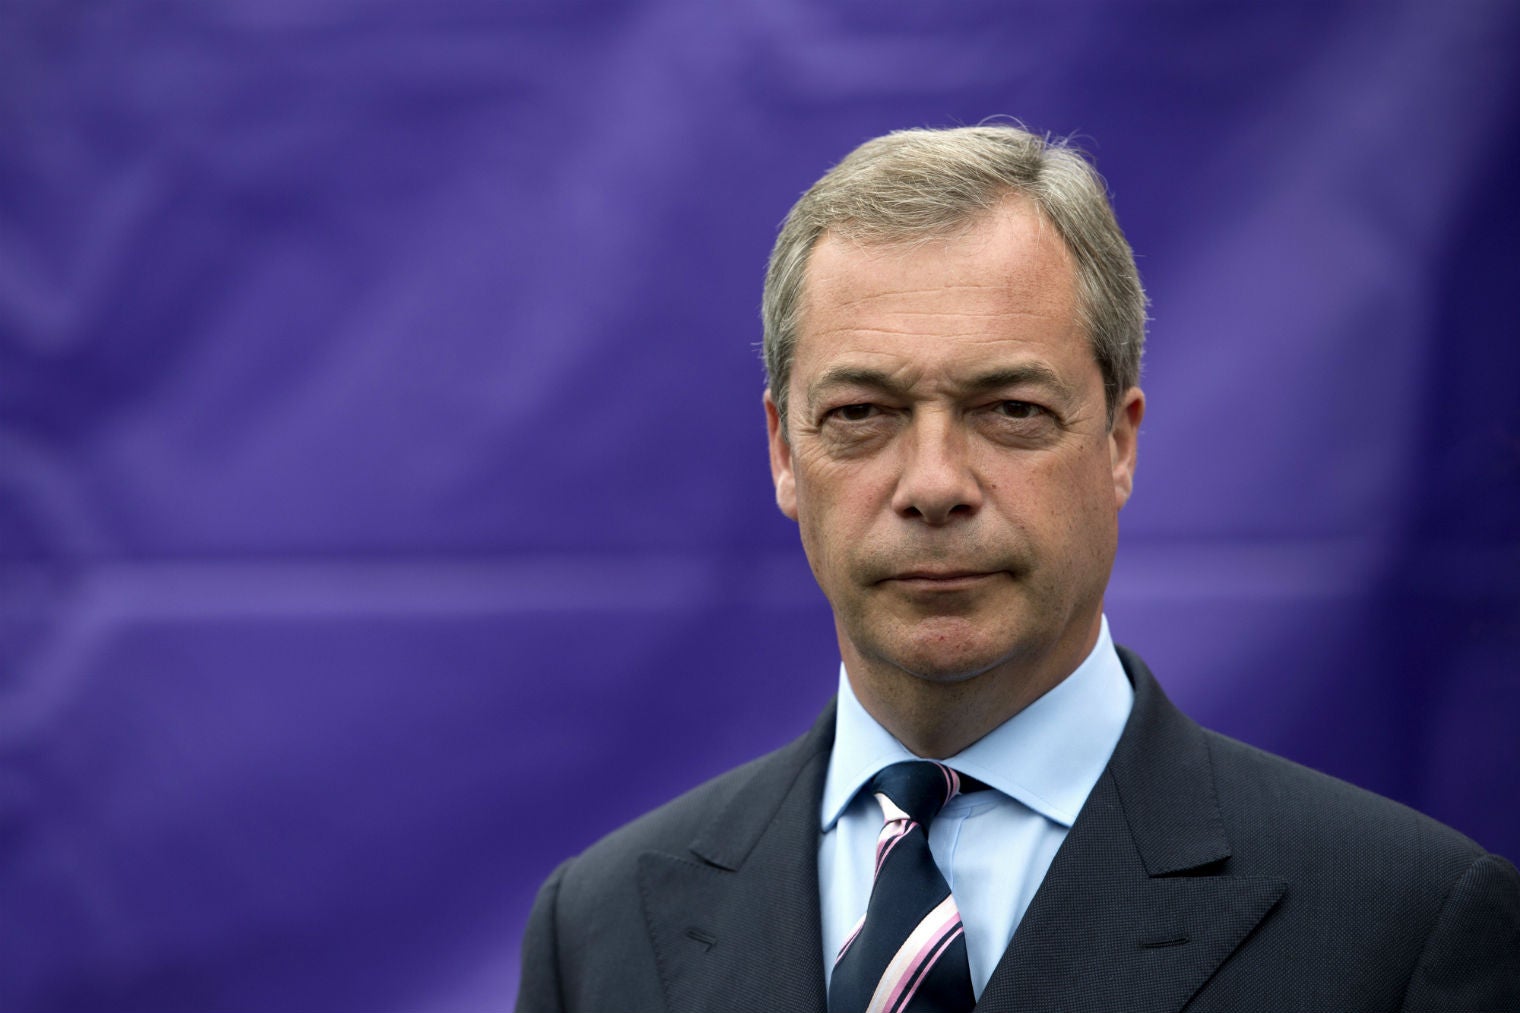 Nigel Farage has claimed the BBC is anti-Ukip because “it received €30m in funding in the past seven years.”